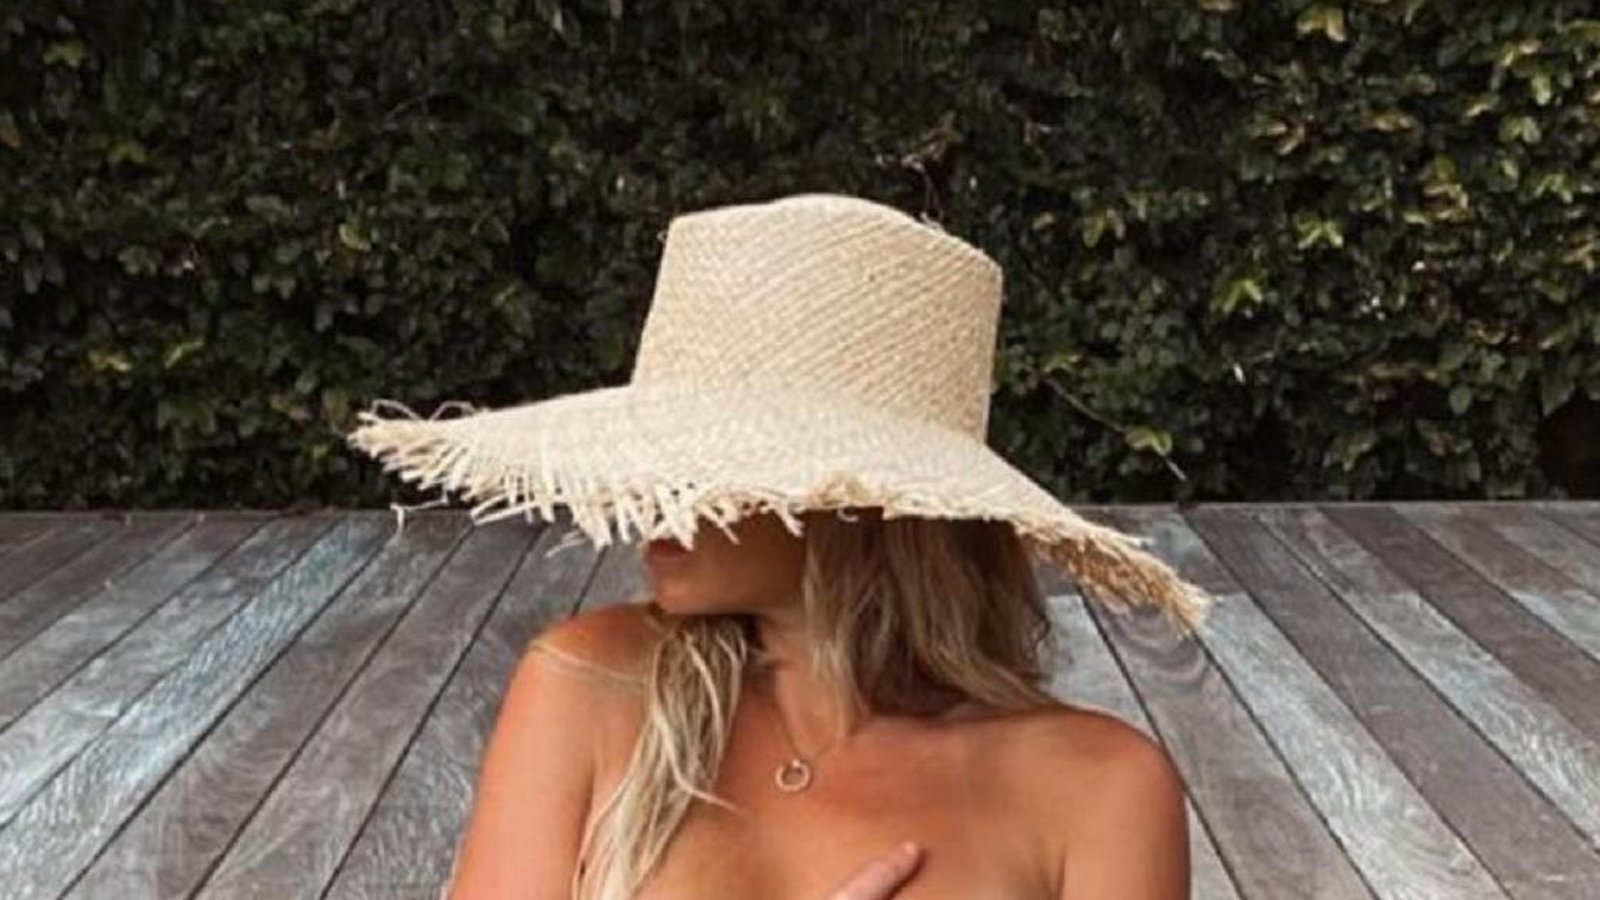 The truth behind Paulina Gretzky’s nude picture revealed!